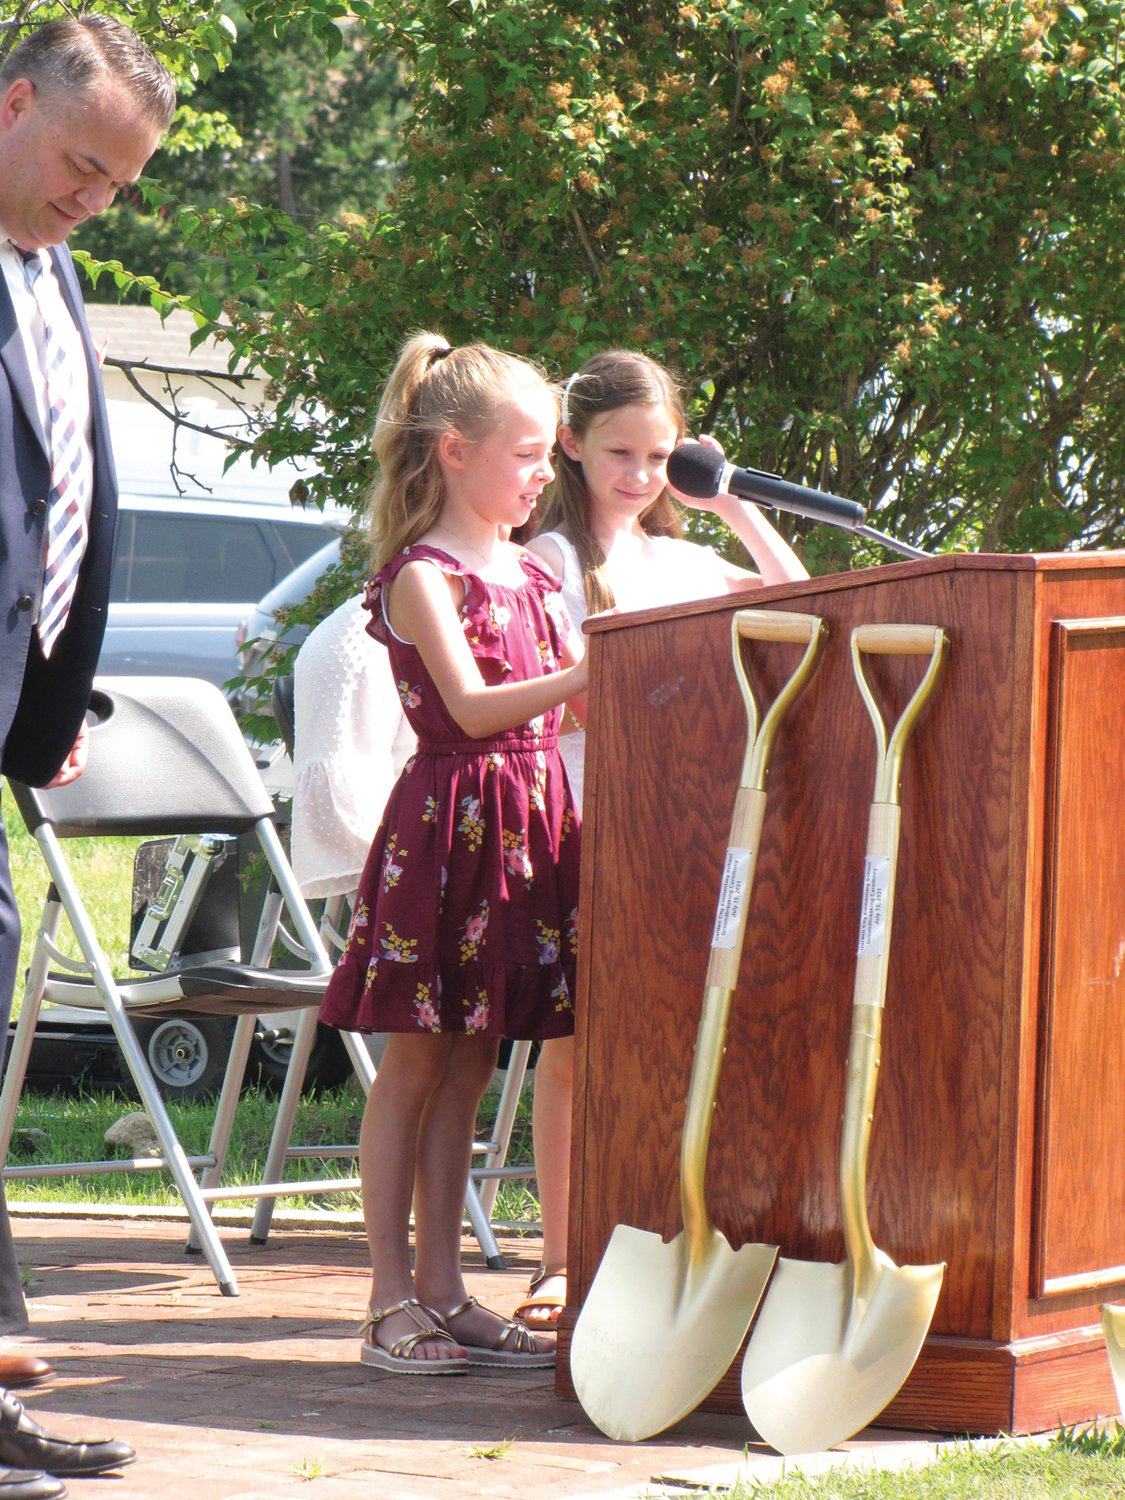 YOUNG VOICES: Jordan Robinson, left, and Charlotte Moffat, who will be third-graders this fall, spoke during last week’s groundbreaking ceremony at Garden City Elementary School.